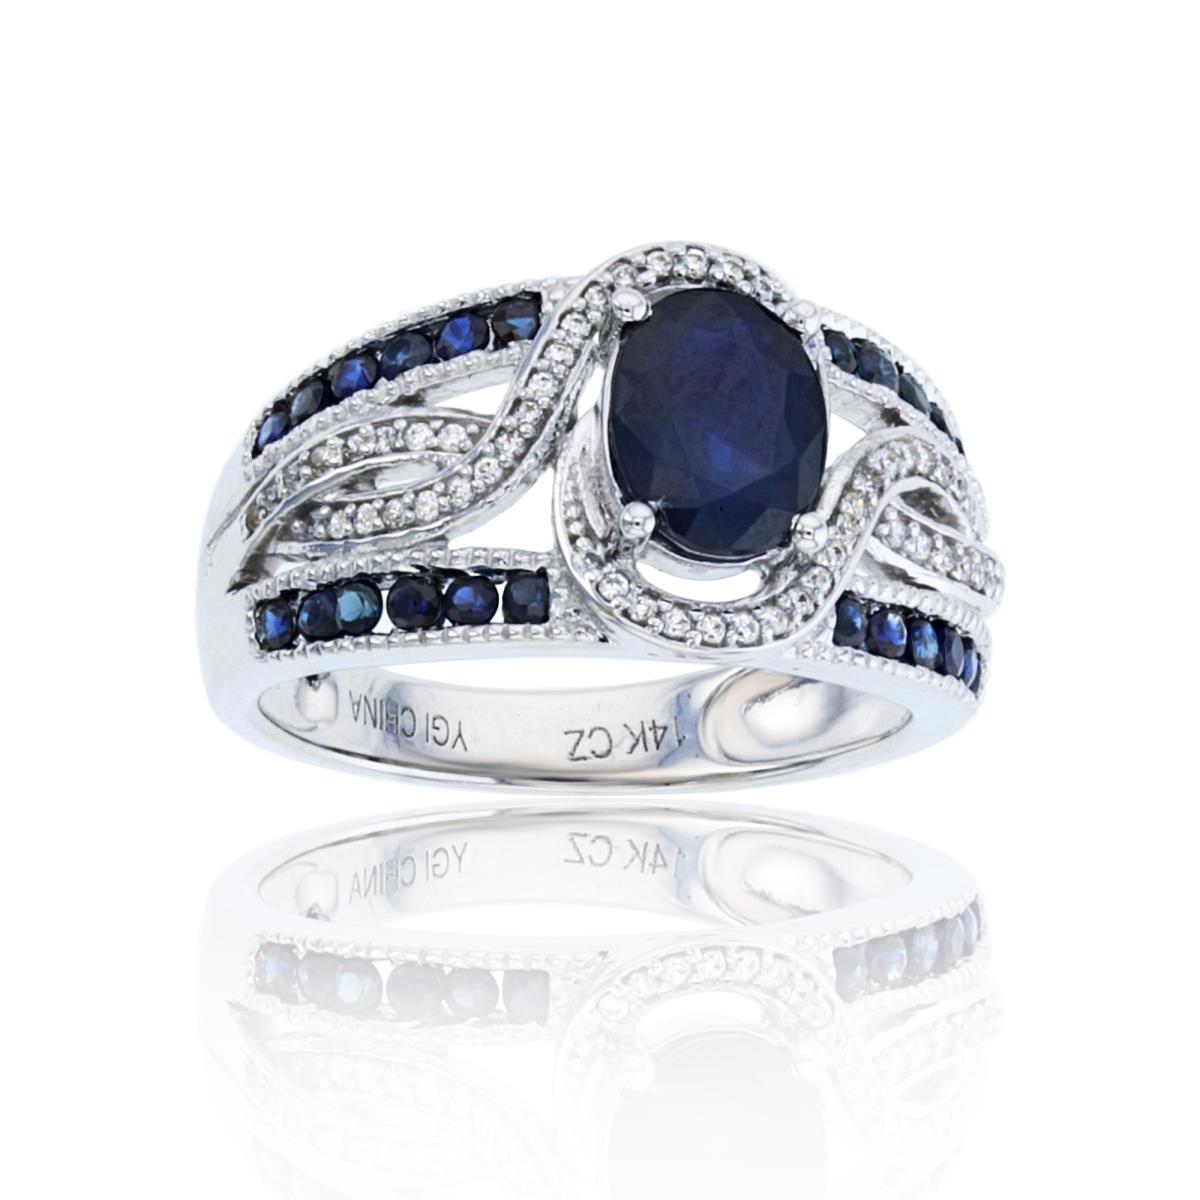 14K White Gold 8x6mm Sapphire & Rd CZ,Sapphire Slythering Ring